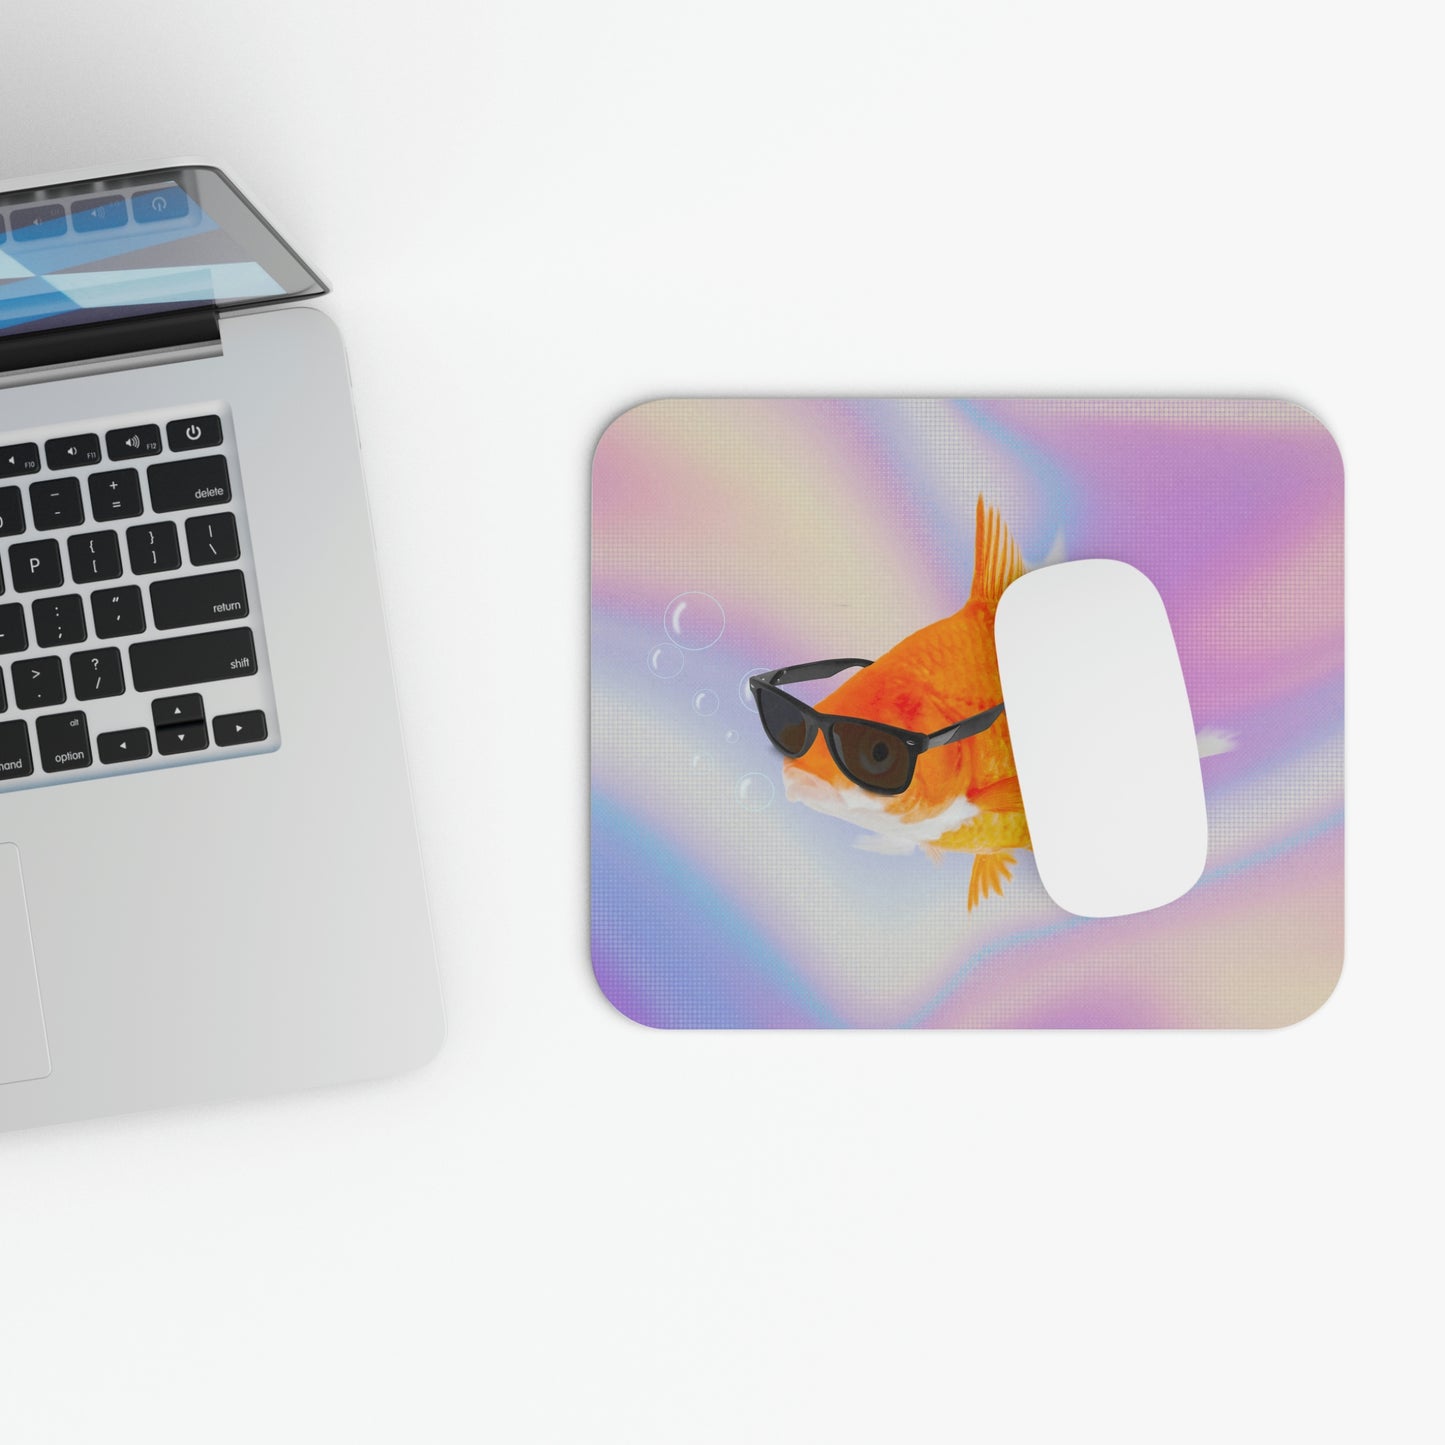 Gold Fish With Sunglasses Mouse Pad